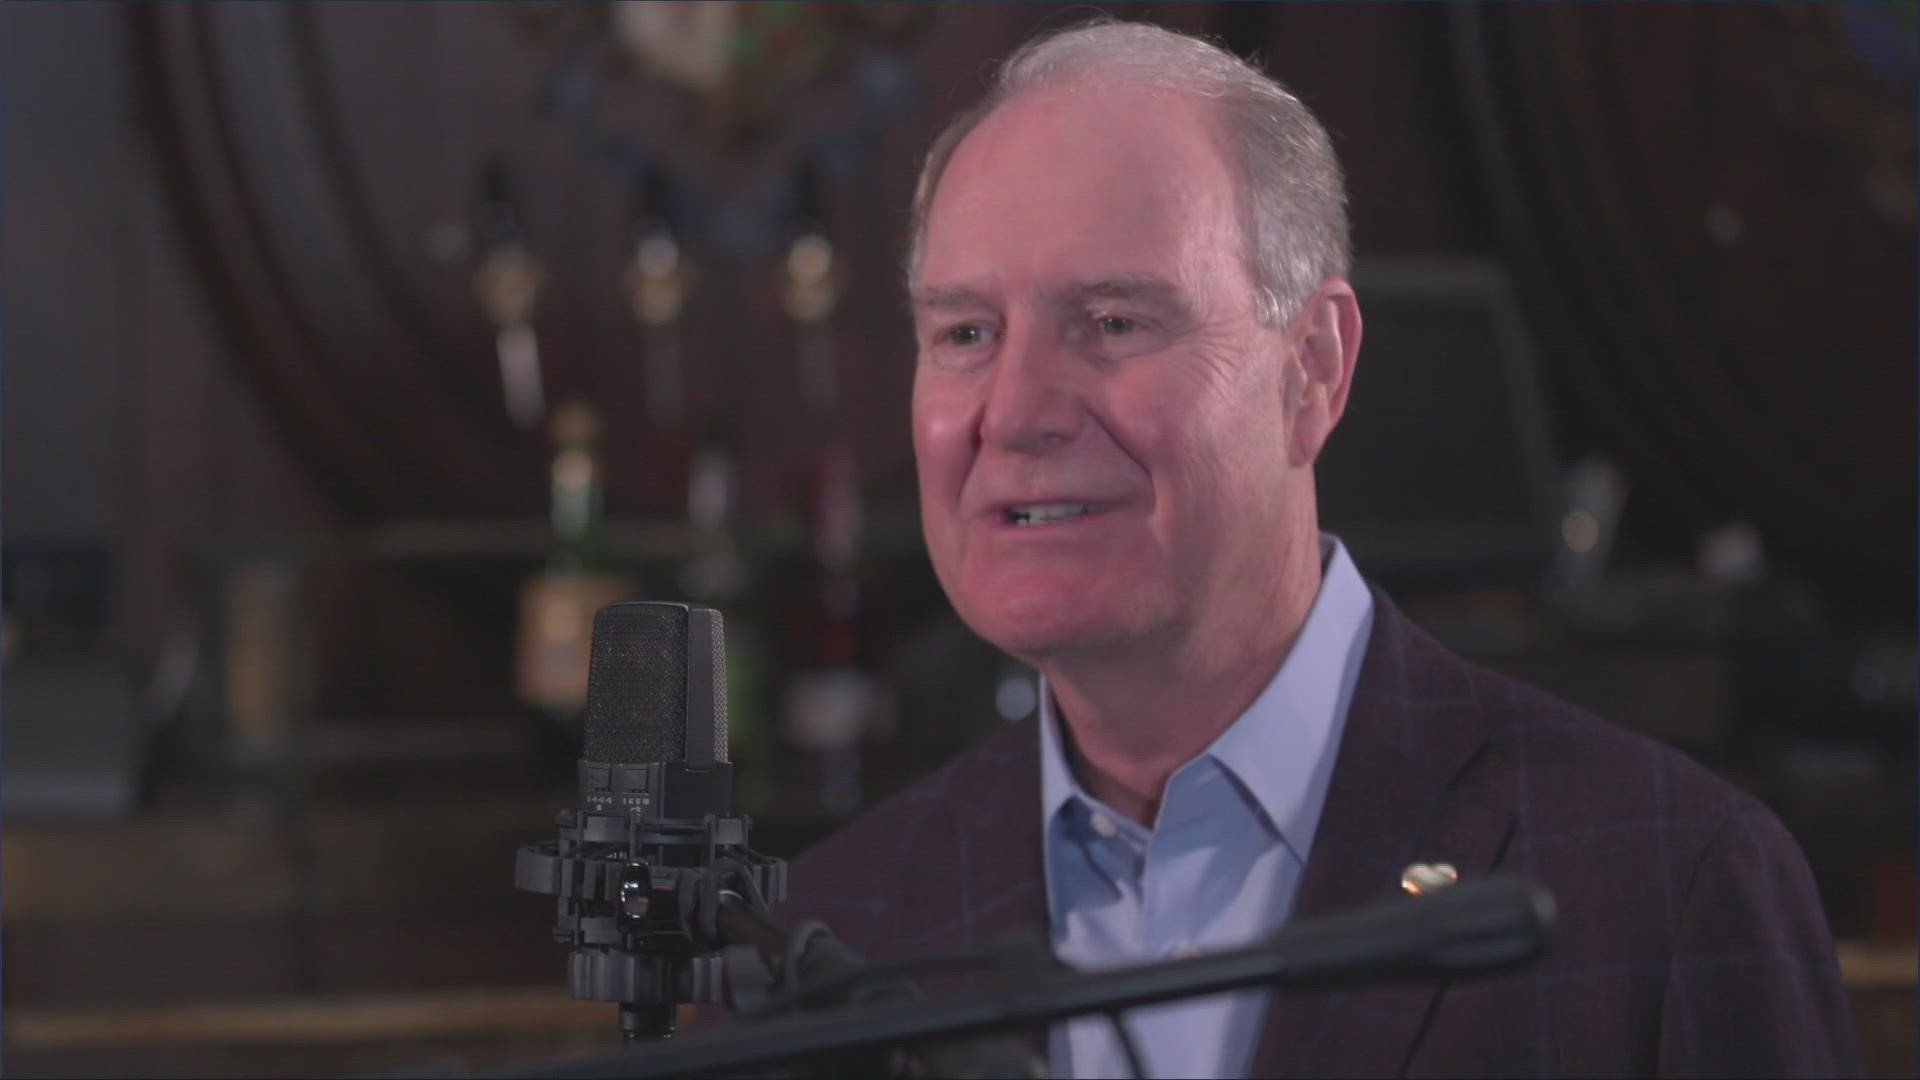 In a wide-ranging interview in this week's Y'all-itics, Southwest Airline CEO Gary Kelly talks about vaccine mandates and his retirement.